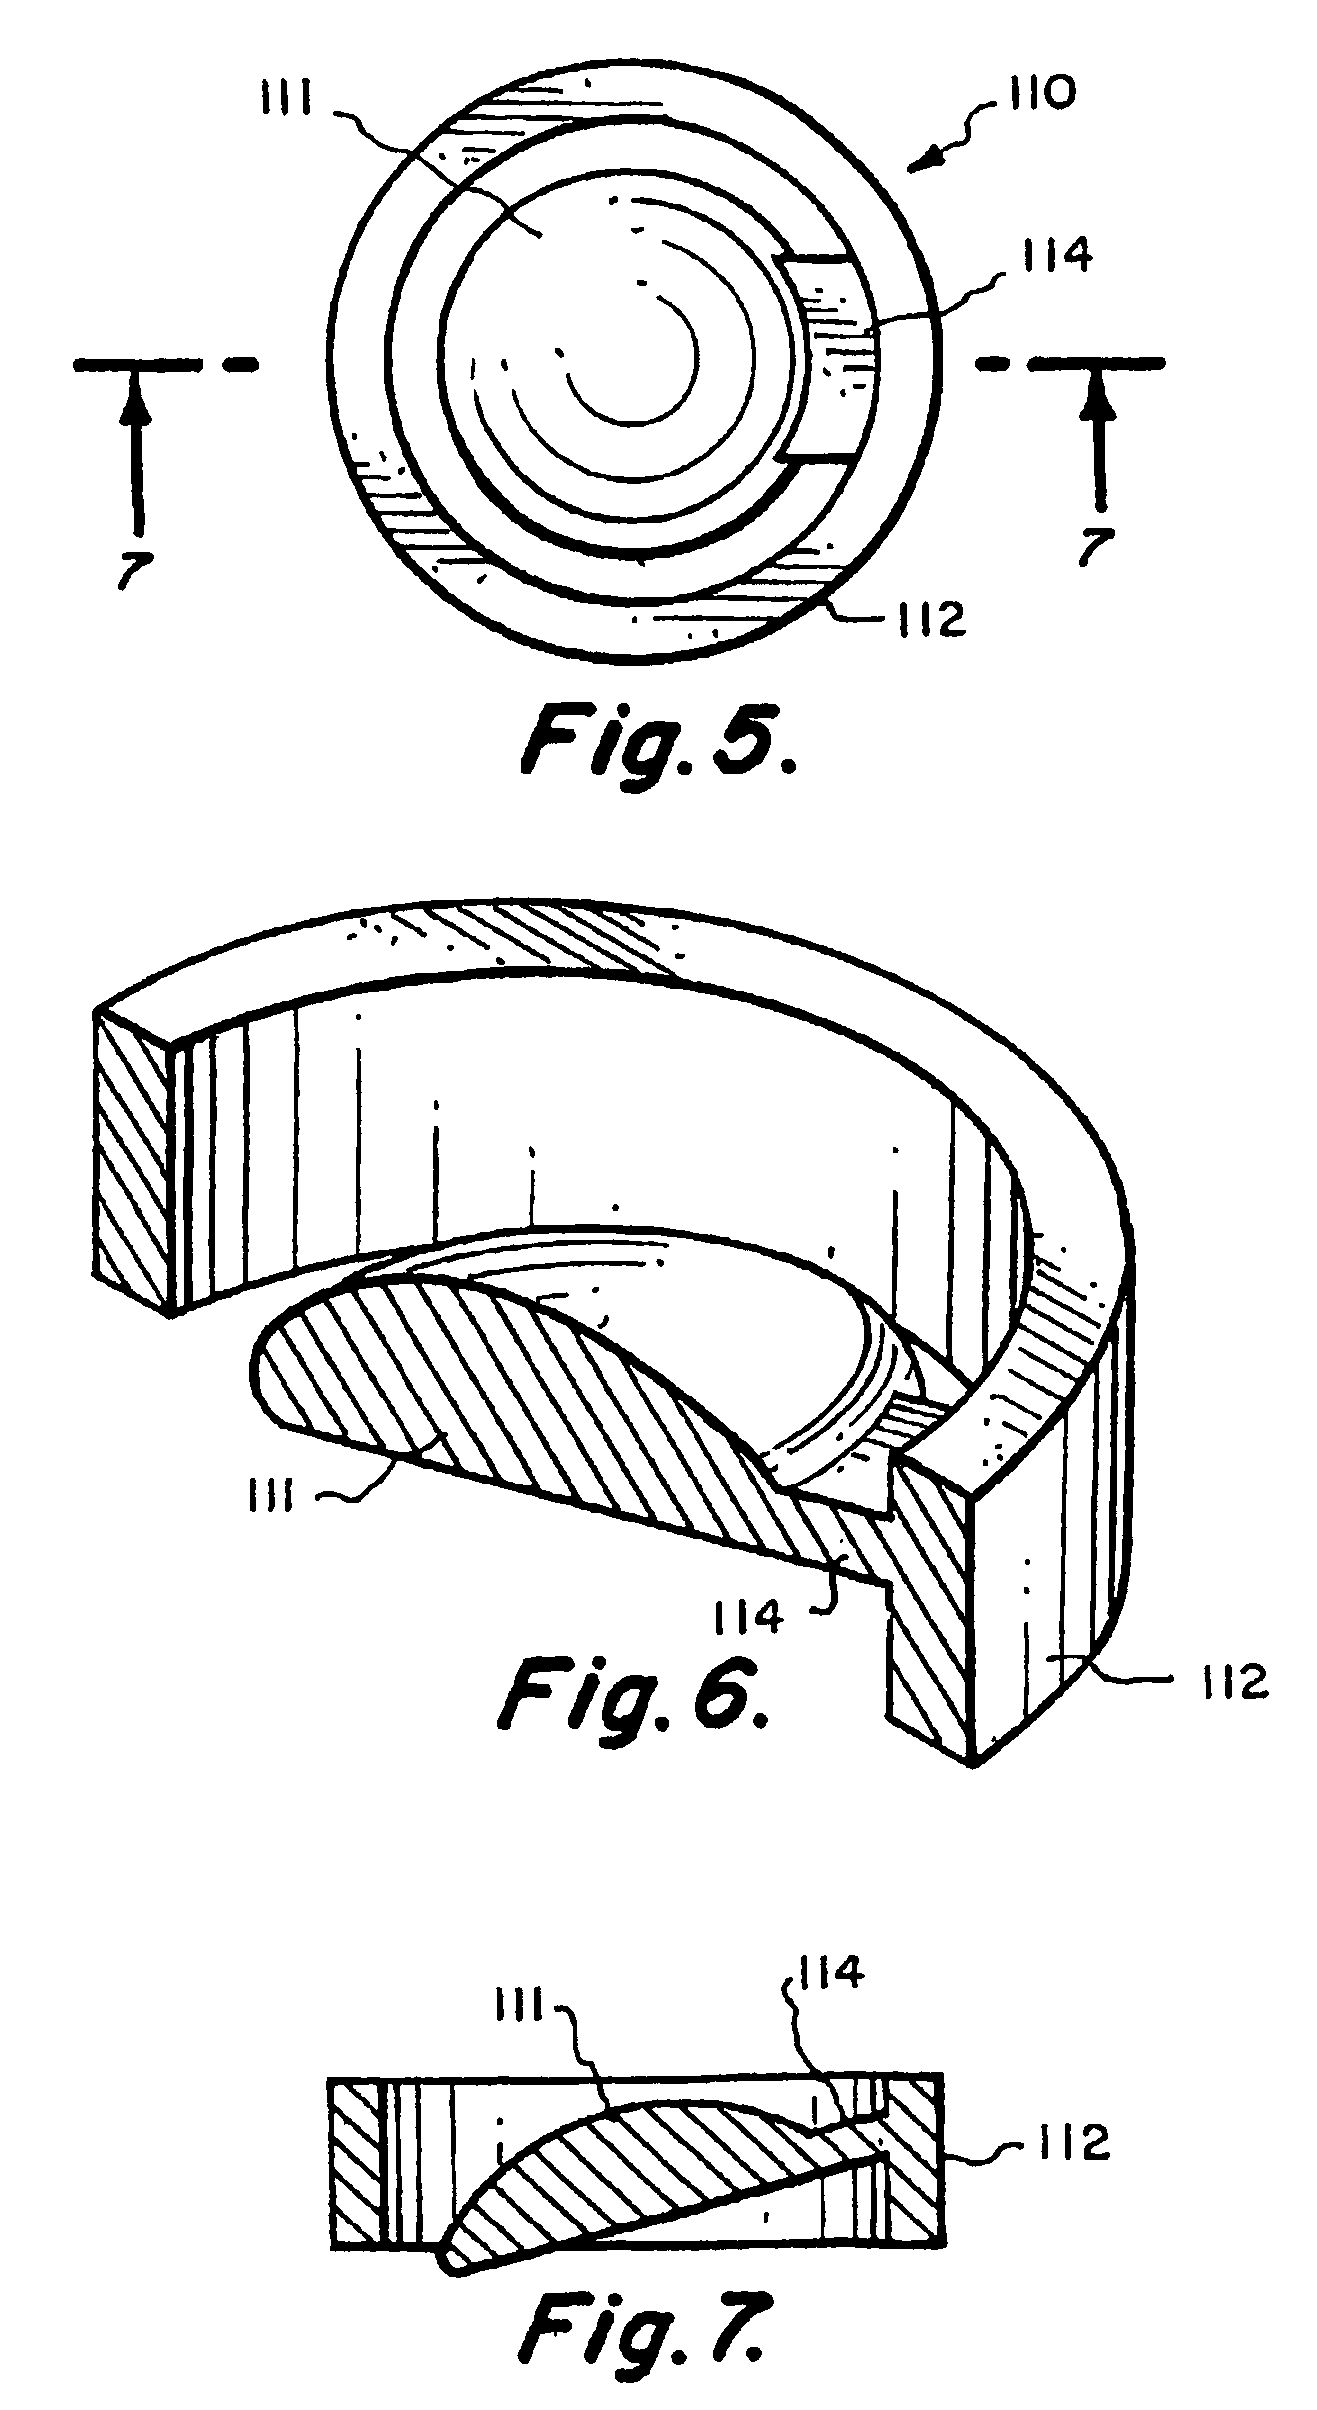 Valve mounting assembly for voice prosthesis-cartridge and ring